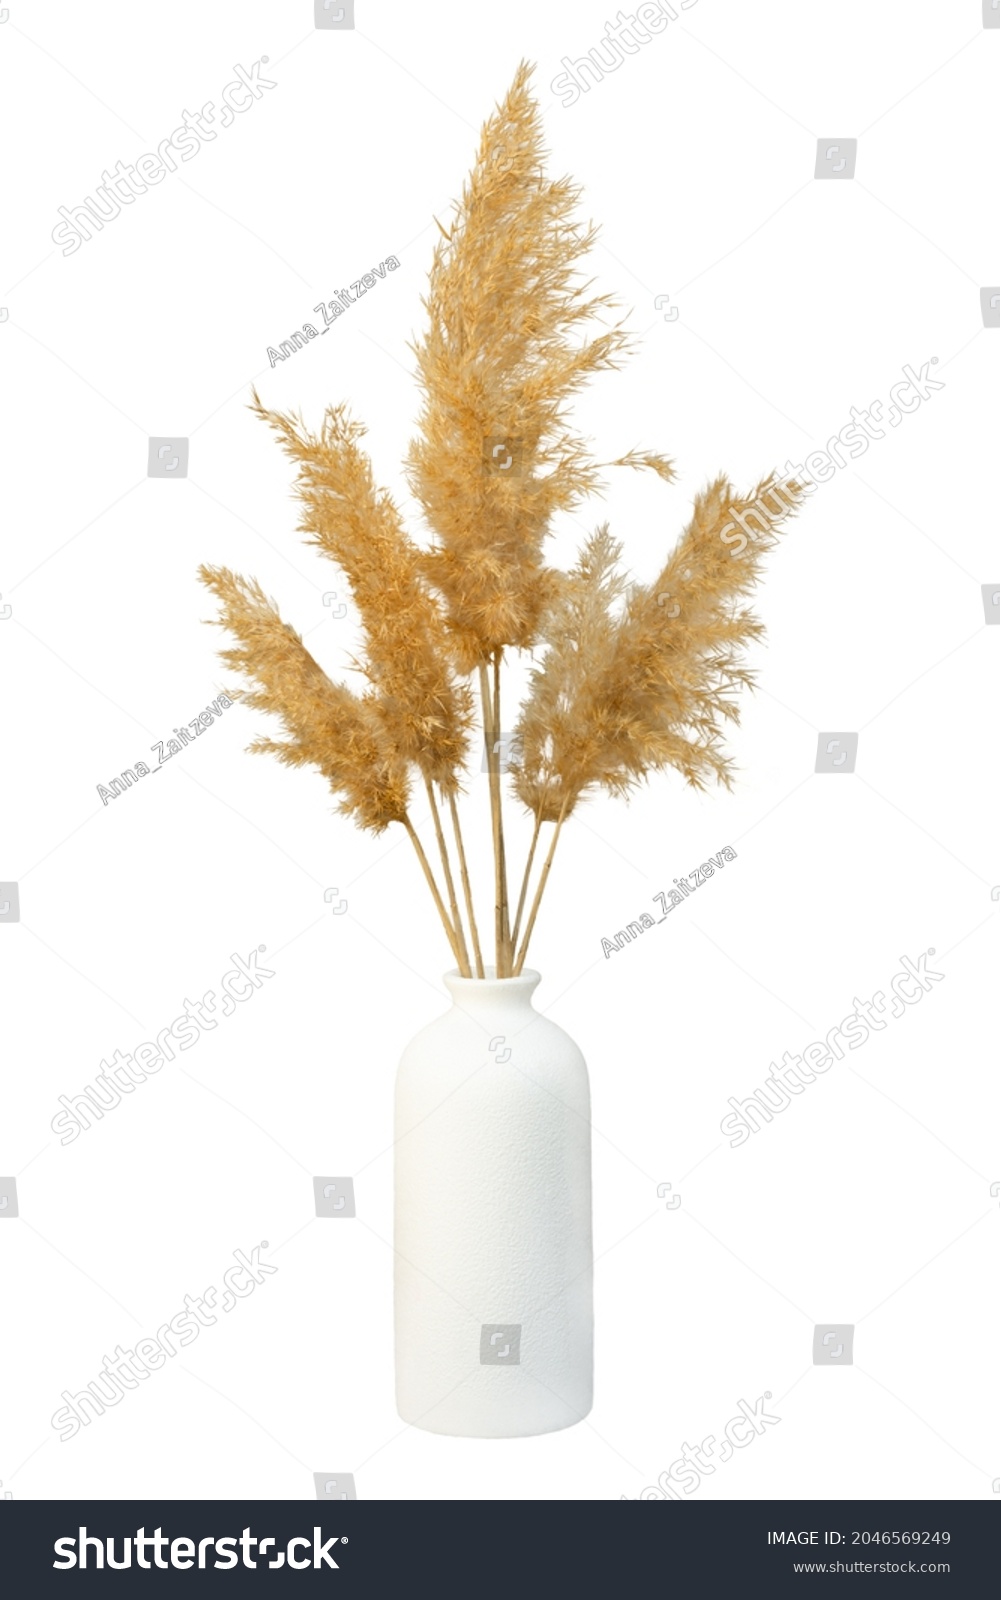 Grass pampas vase isolated. Branches of dried reeds of reed grass on a white background. An element for decoration, natural design of packages, notebooks, covers. Gray-beige dried fluffy plant #2046569249